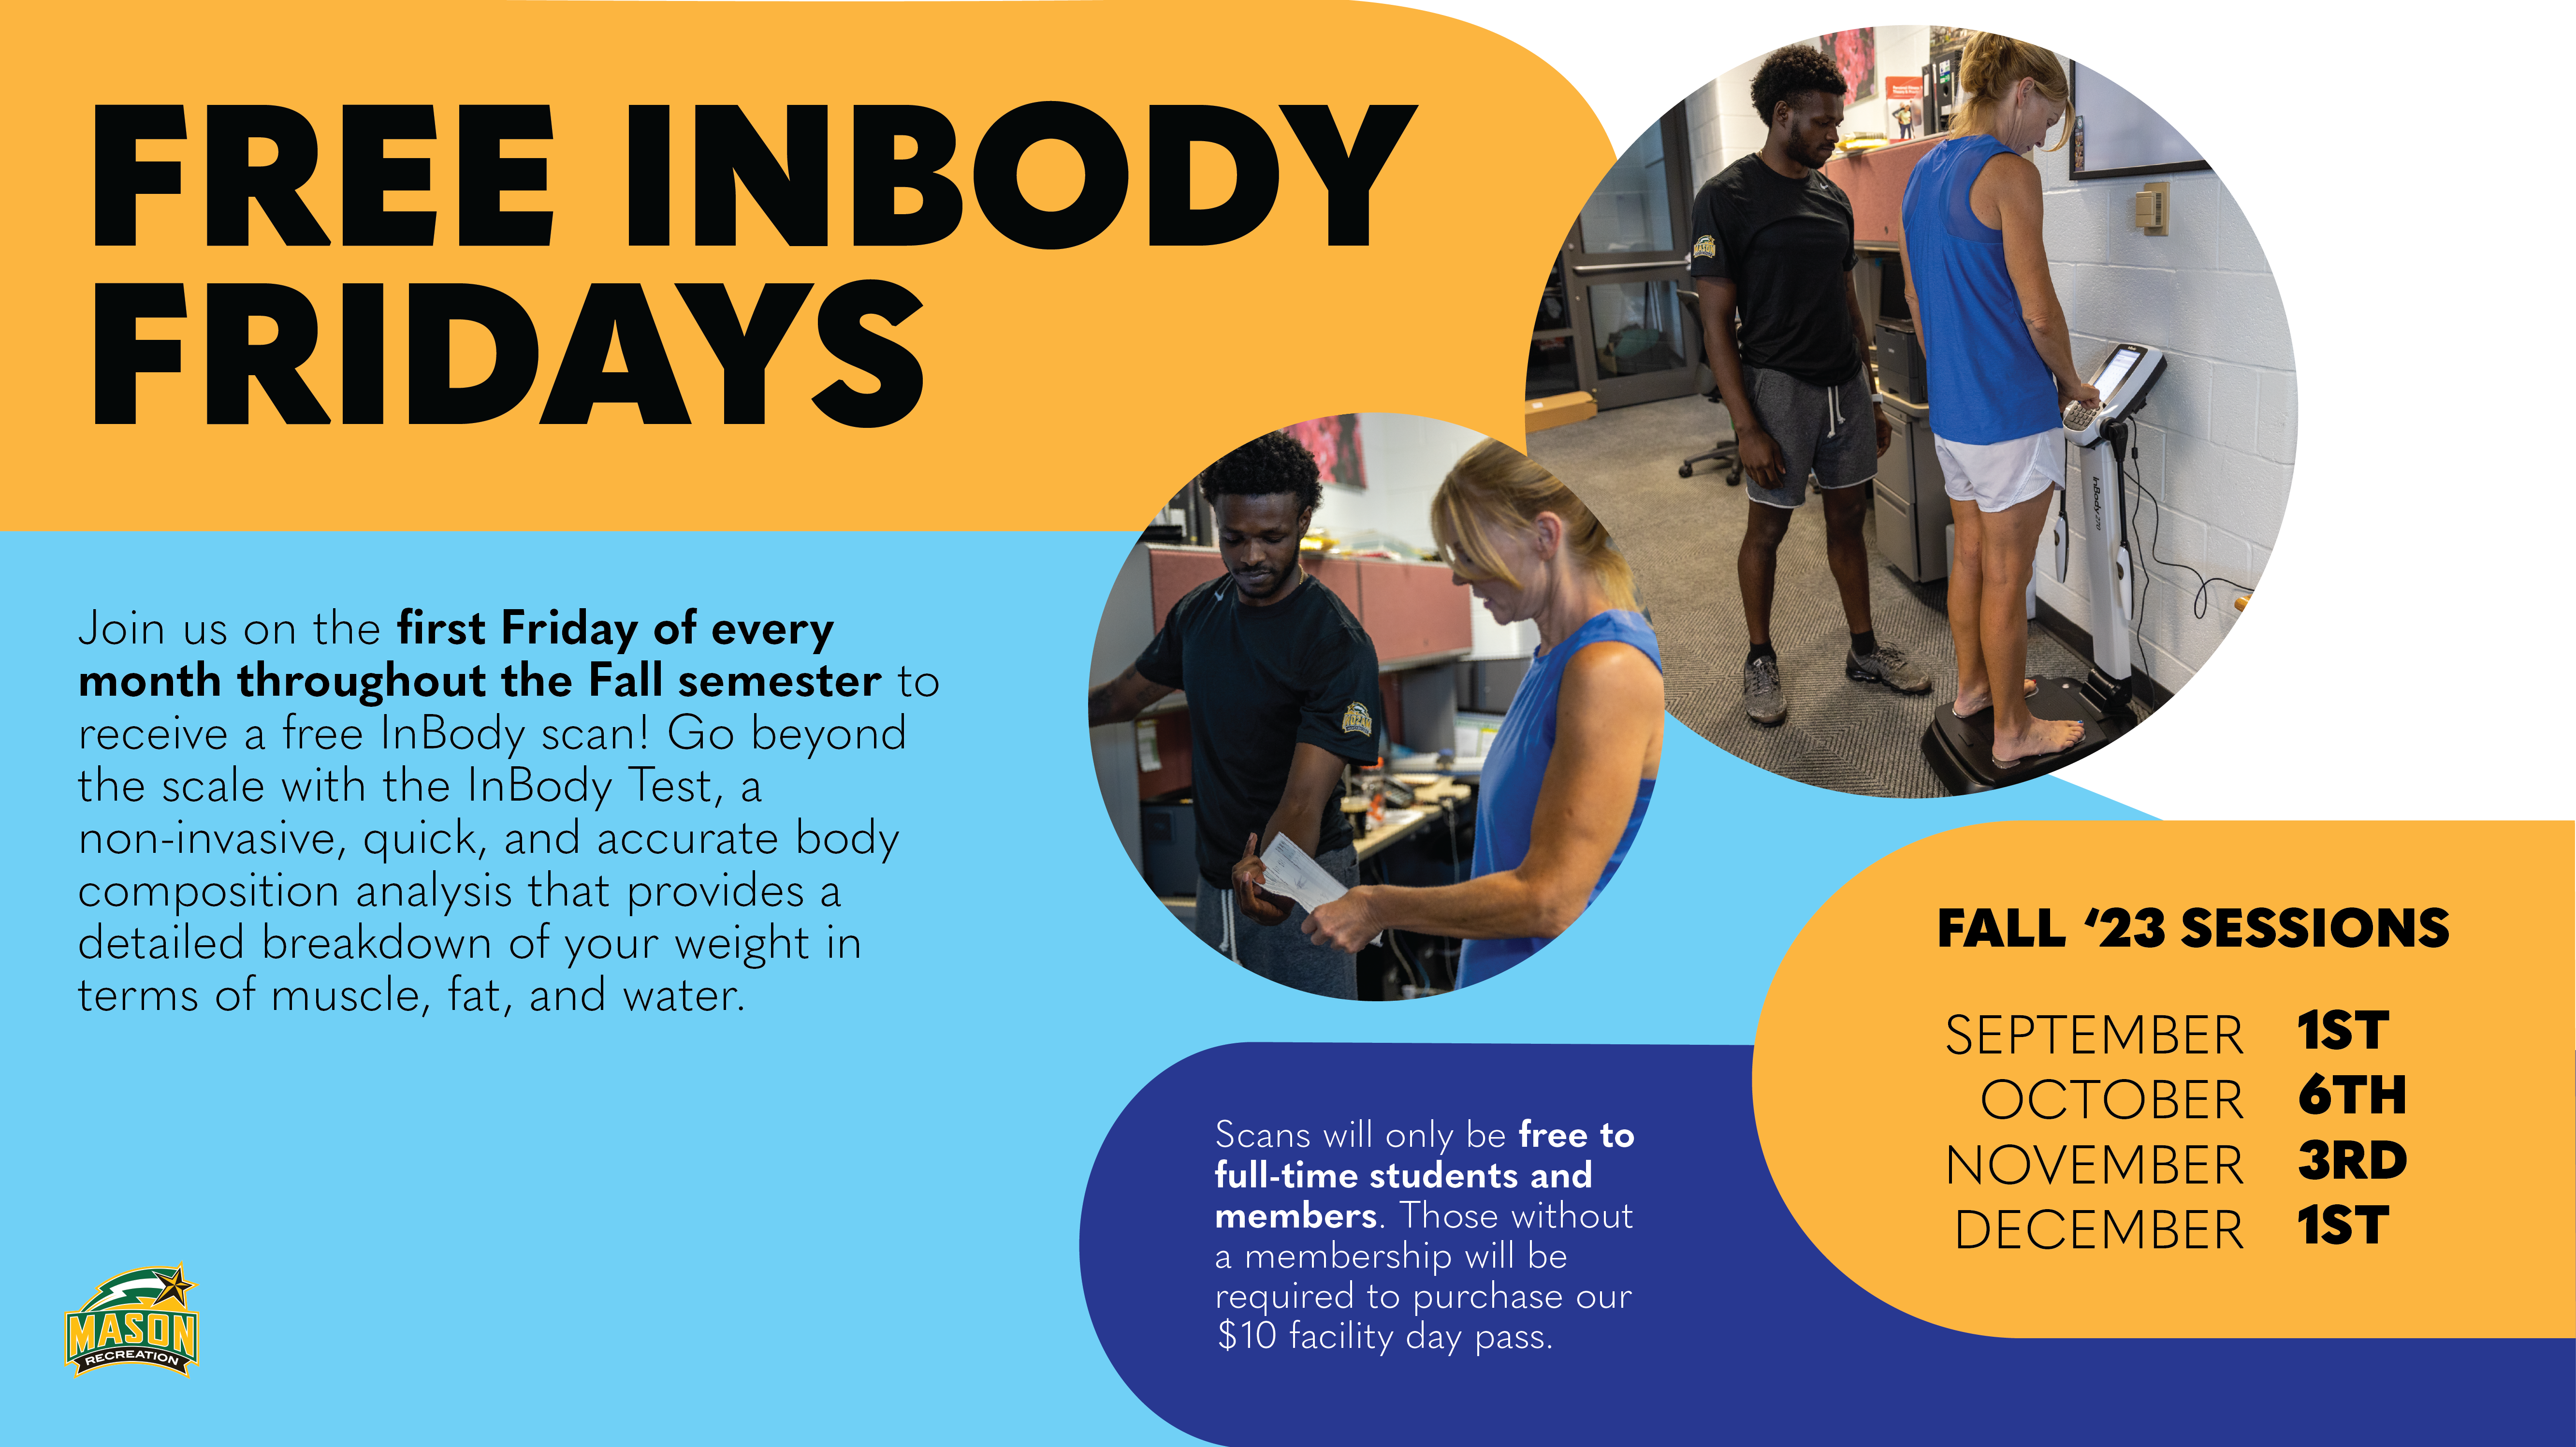 Discover your Health  Free Inbody Scans on First Friday of Every Month! -  Recreation